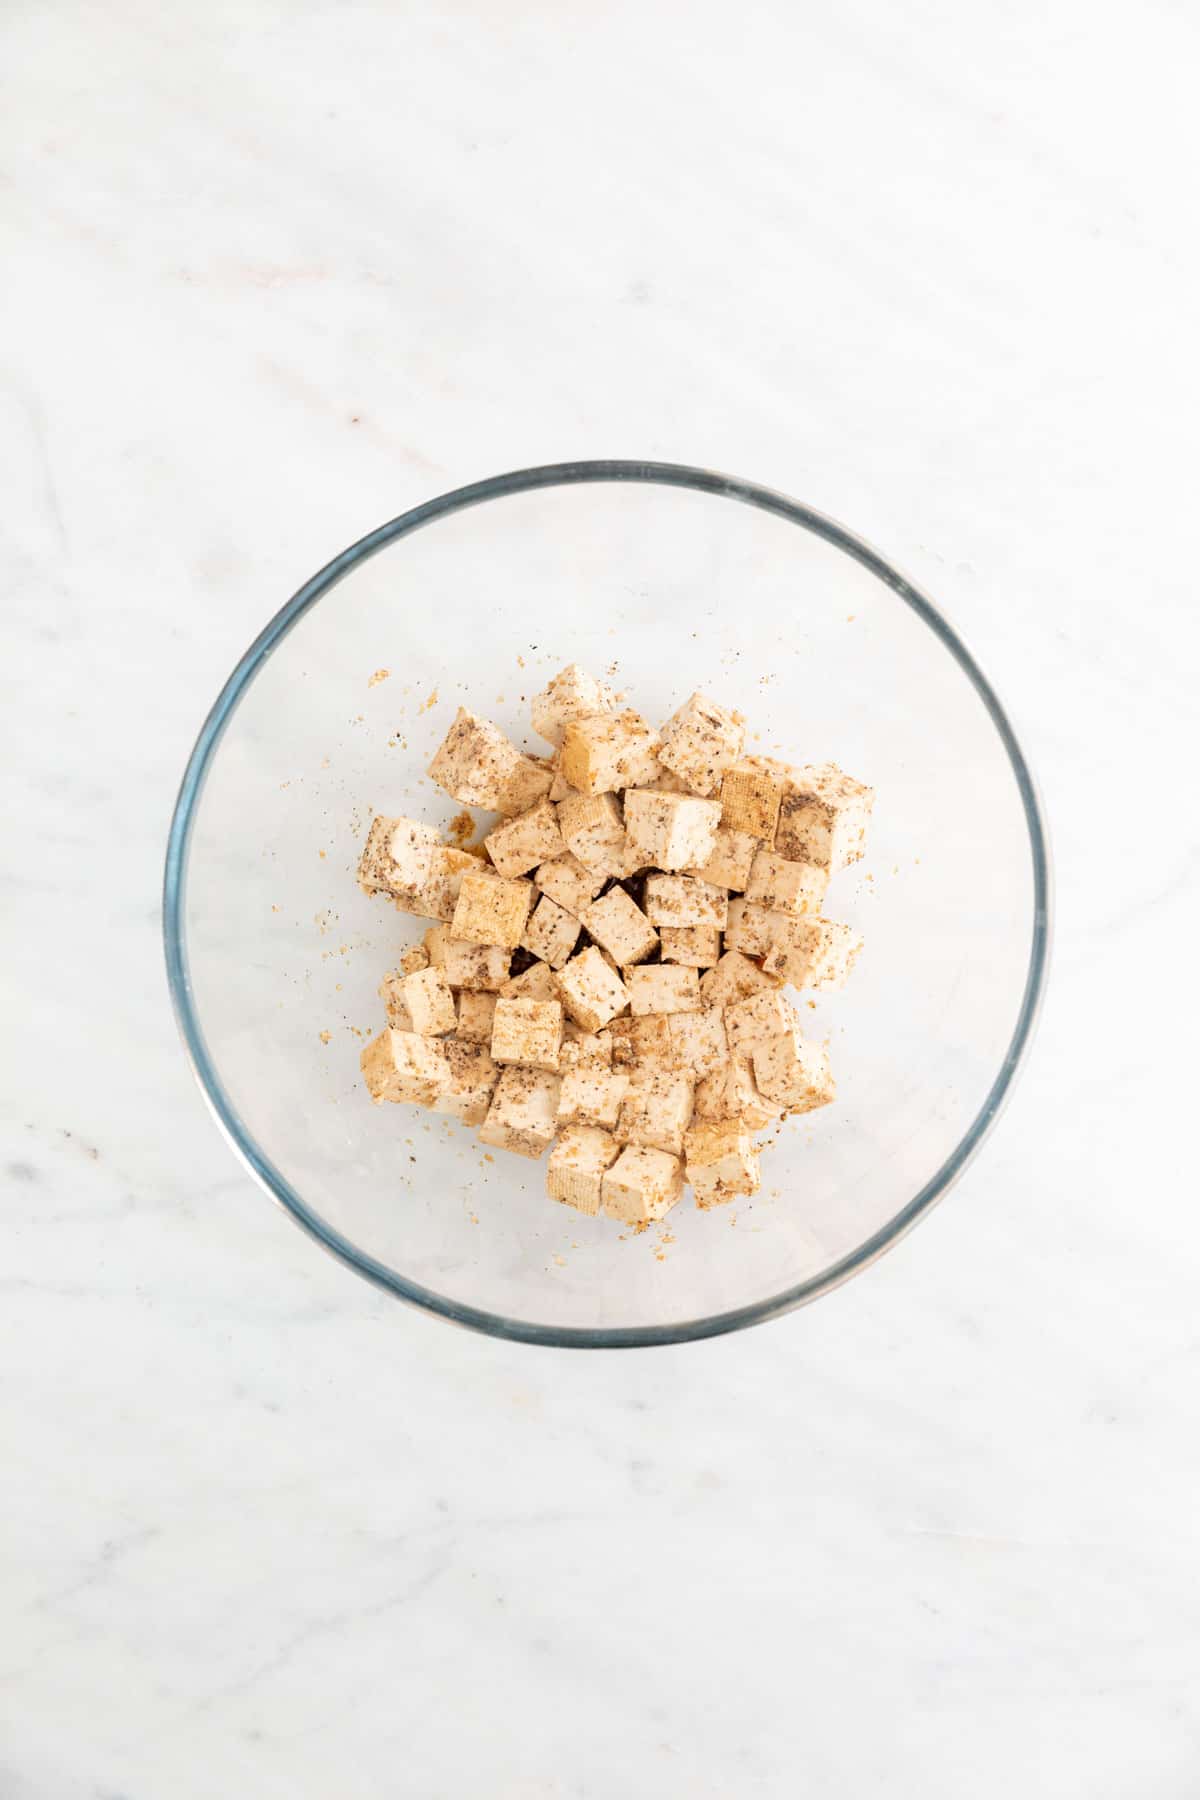 Tofu cubes already mixed with seasonings in a large mixing bowl.